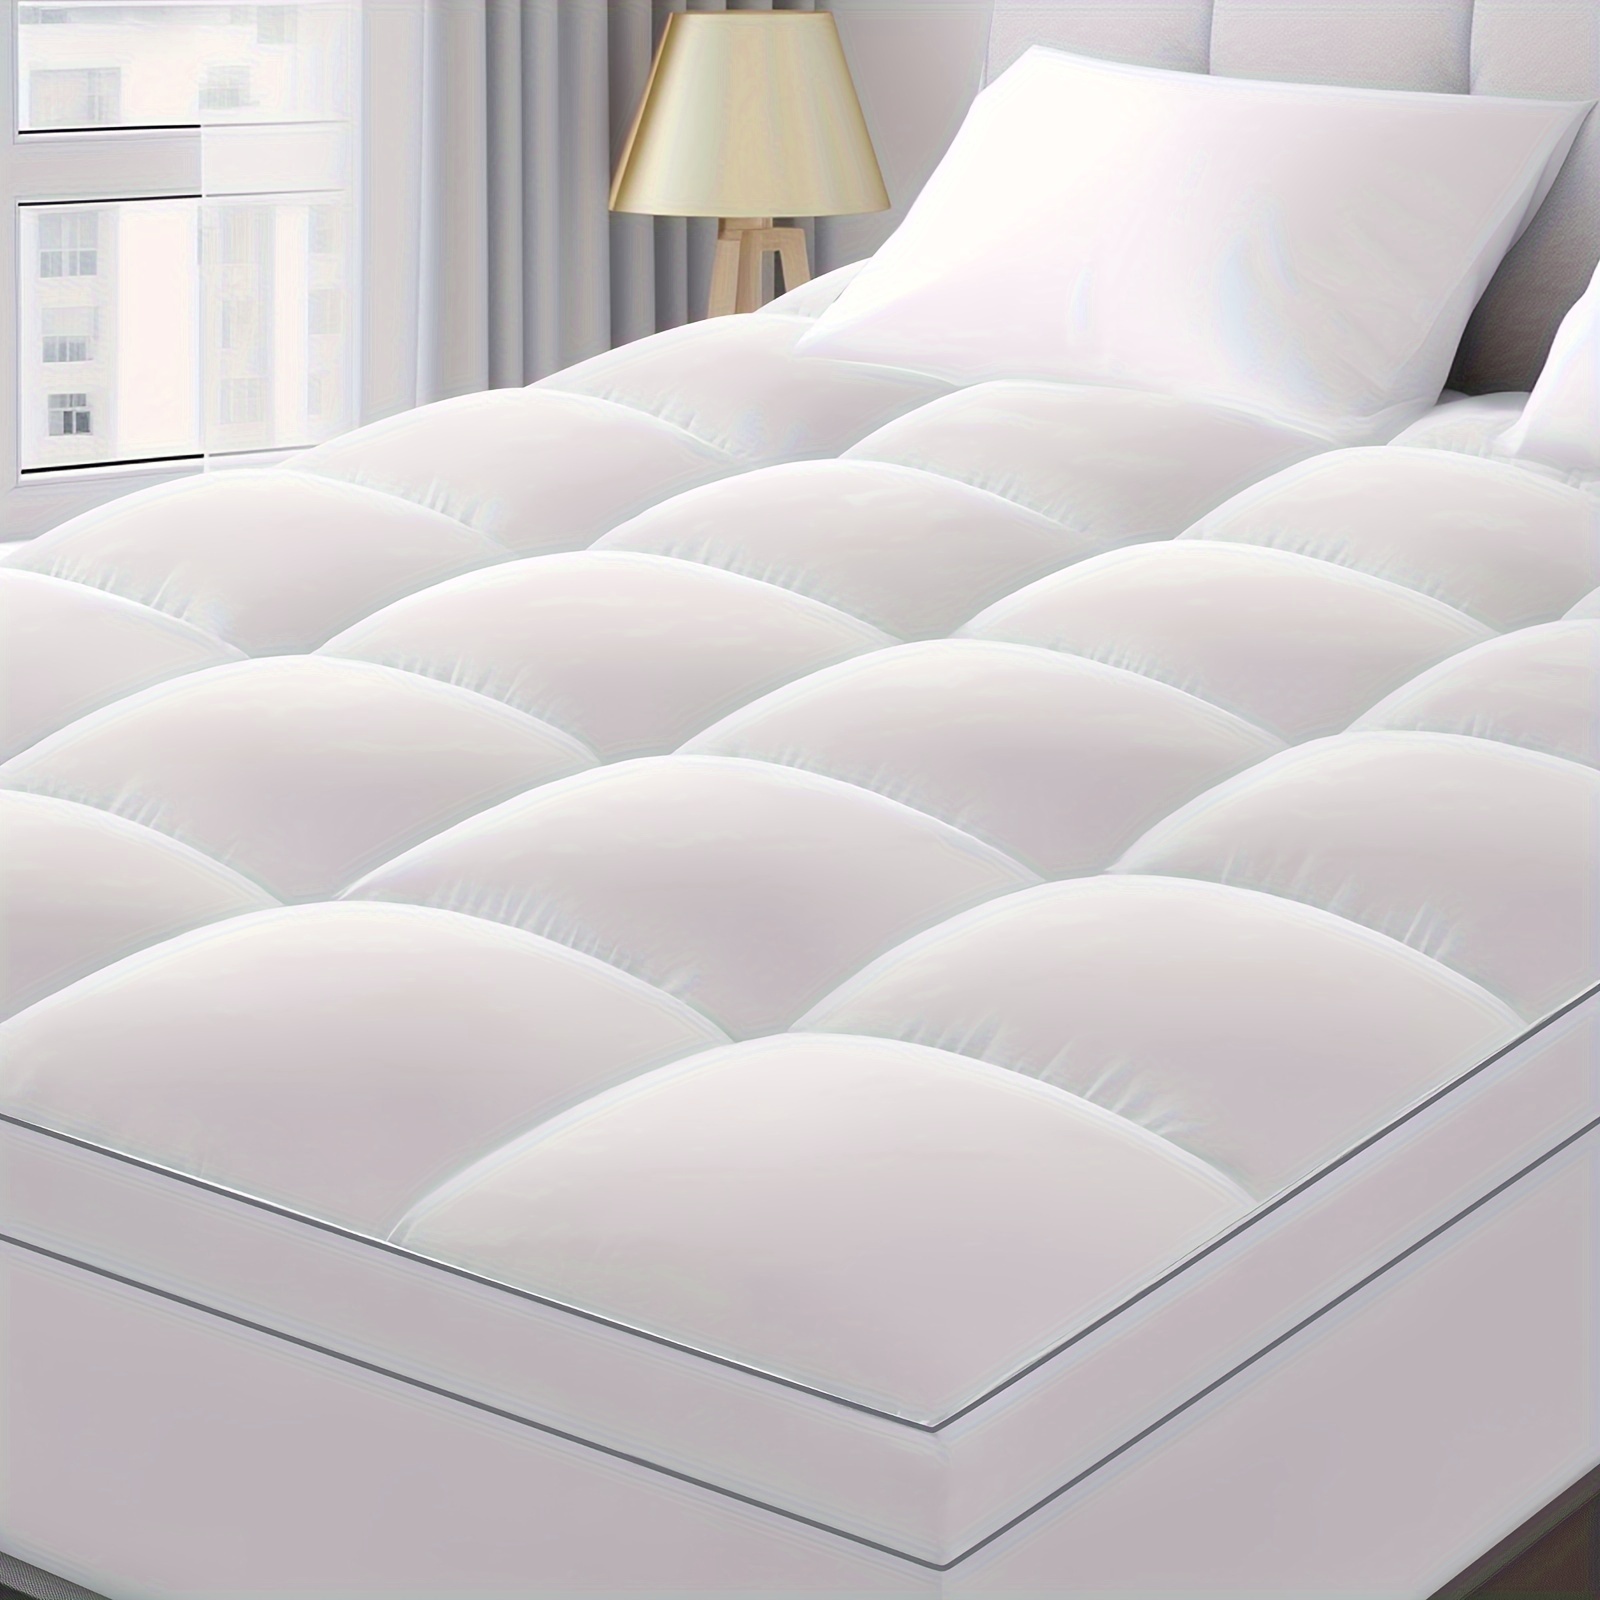 

850gsm Extra Thick With Flat Sheet And Pillowcases - Extra Thick Mattress Pad Cover For Back Pain - Soft Bedding Sheet - Overfilled Plush Pillow Top With 8-21 Inch Deep Pocket